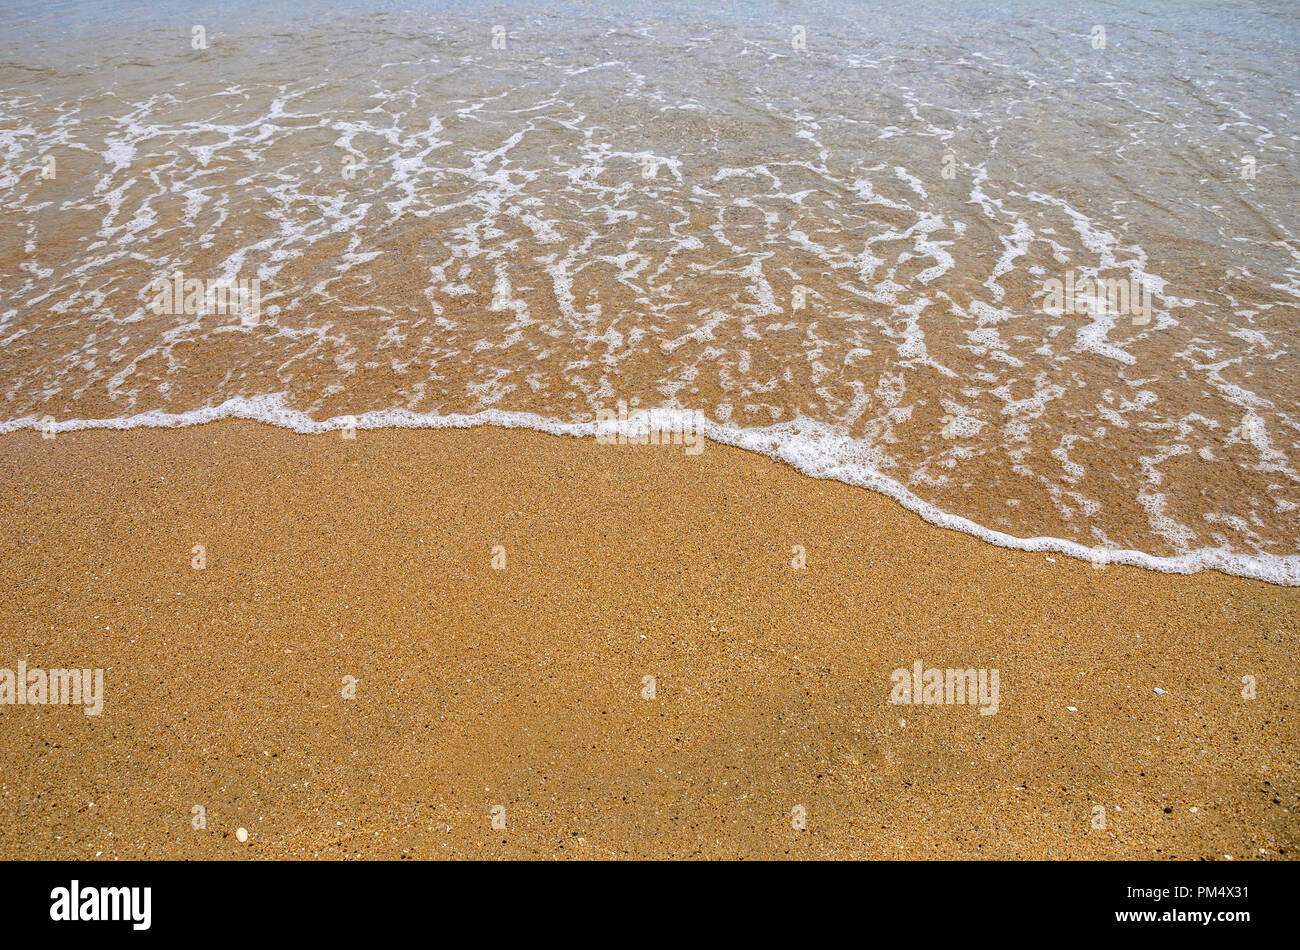 Wet sand on the beach. A part of the sea is visible. Stock Photo